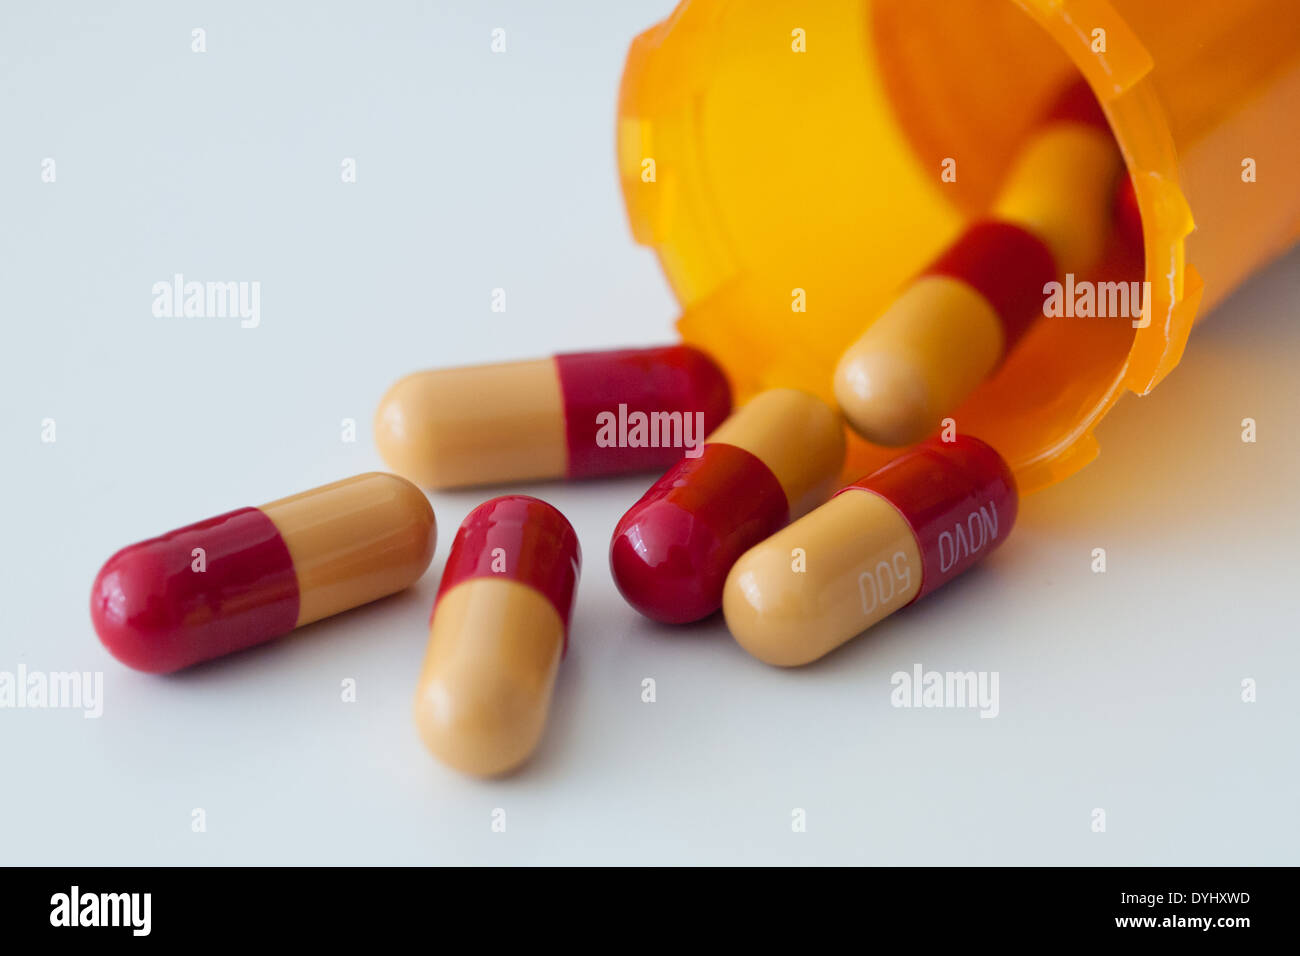 Amoxicillin 500mg capsules, a commonly prescribed antibiotic to treat bacterial infections. Stock Photo